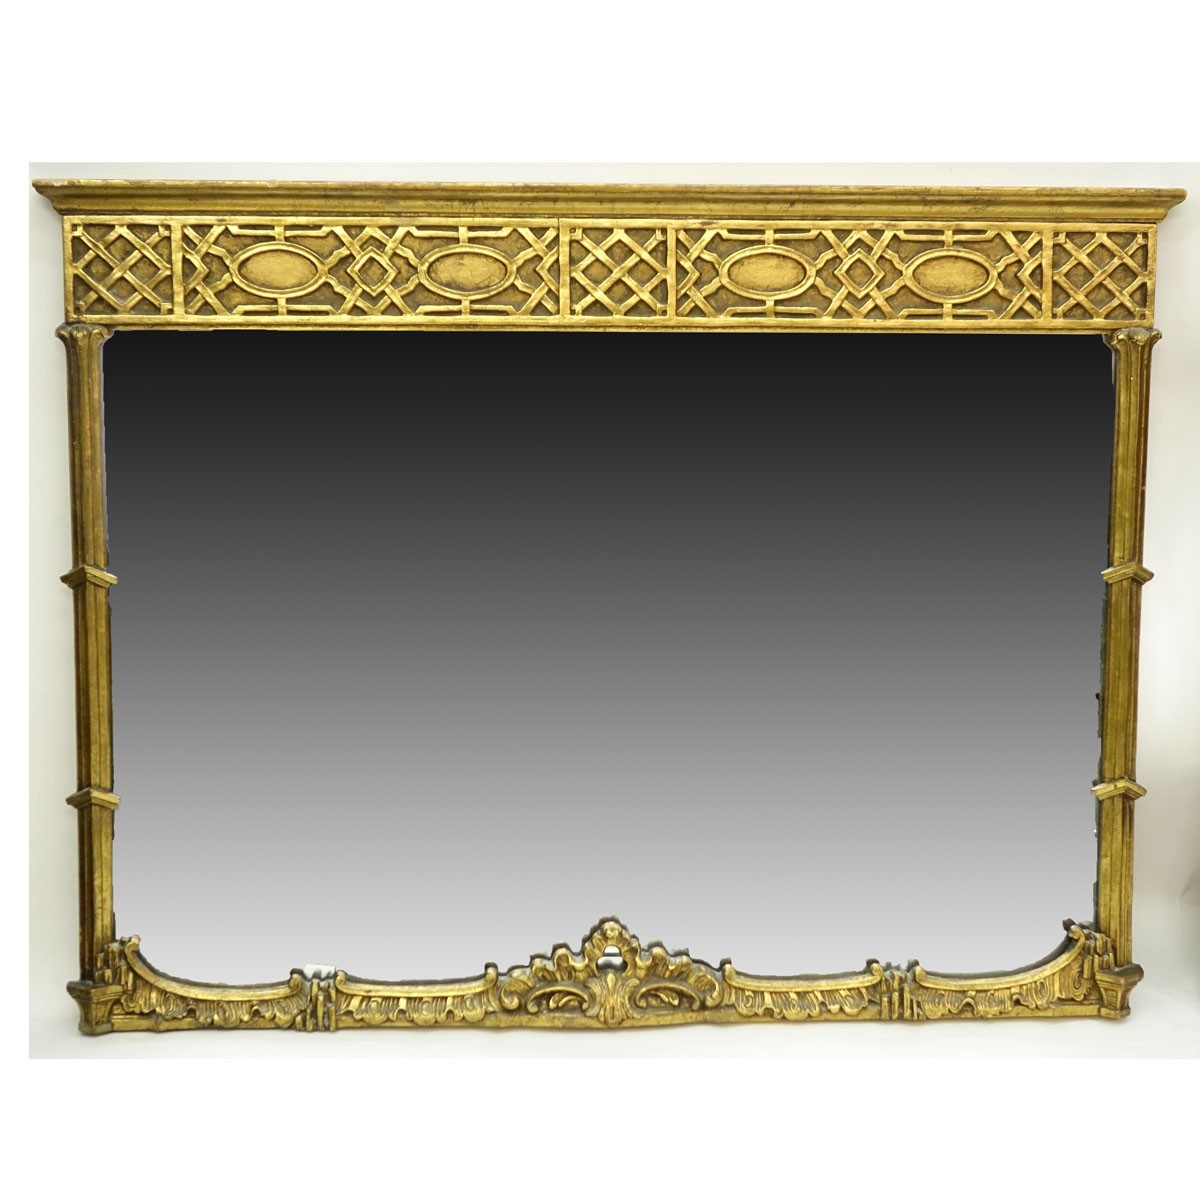 Antique Style Italian Giltwood Carved Mirror. Rubbing to gilt, scuffs and scratches to frame.